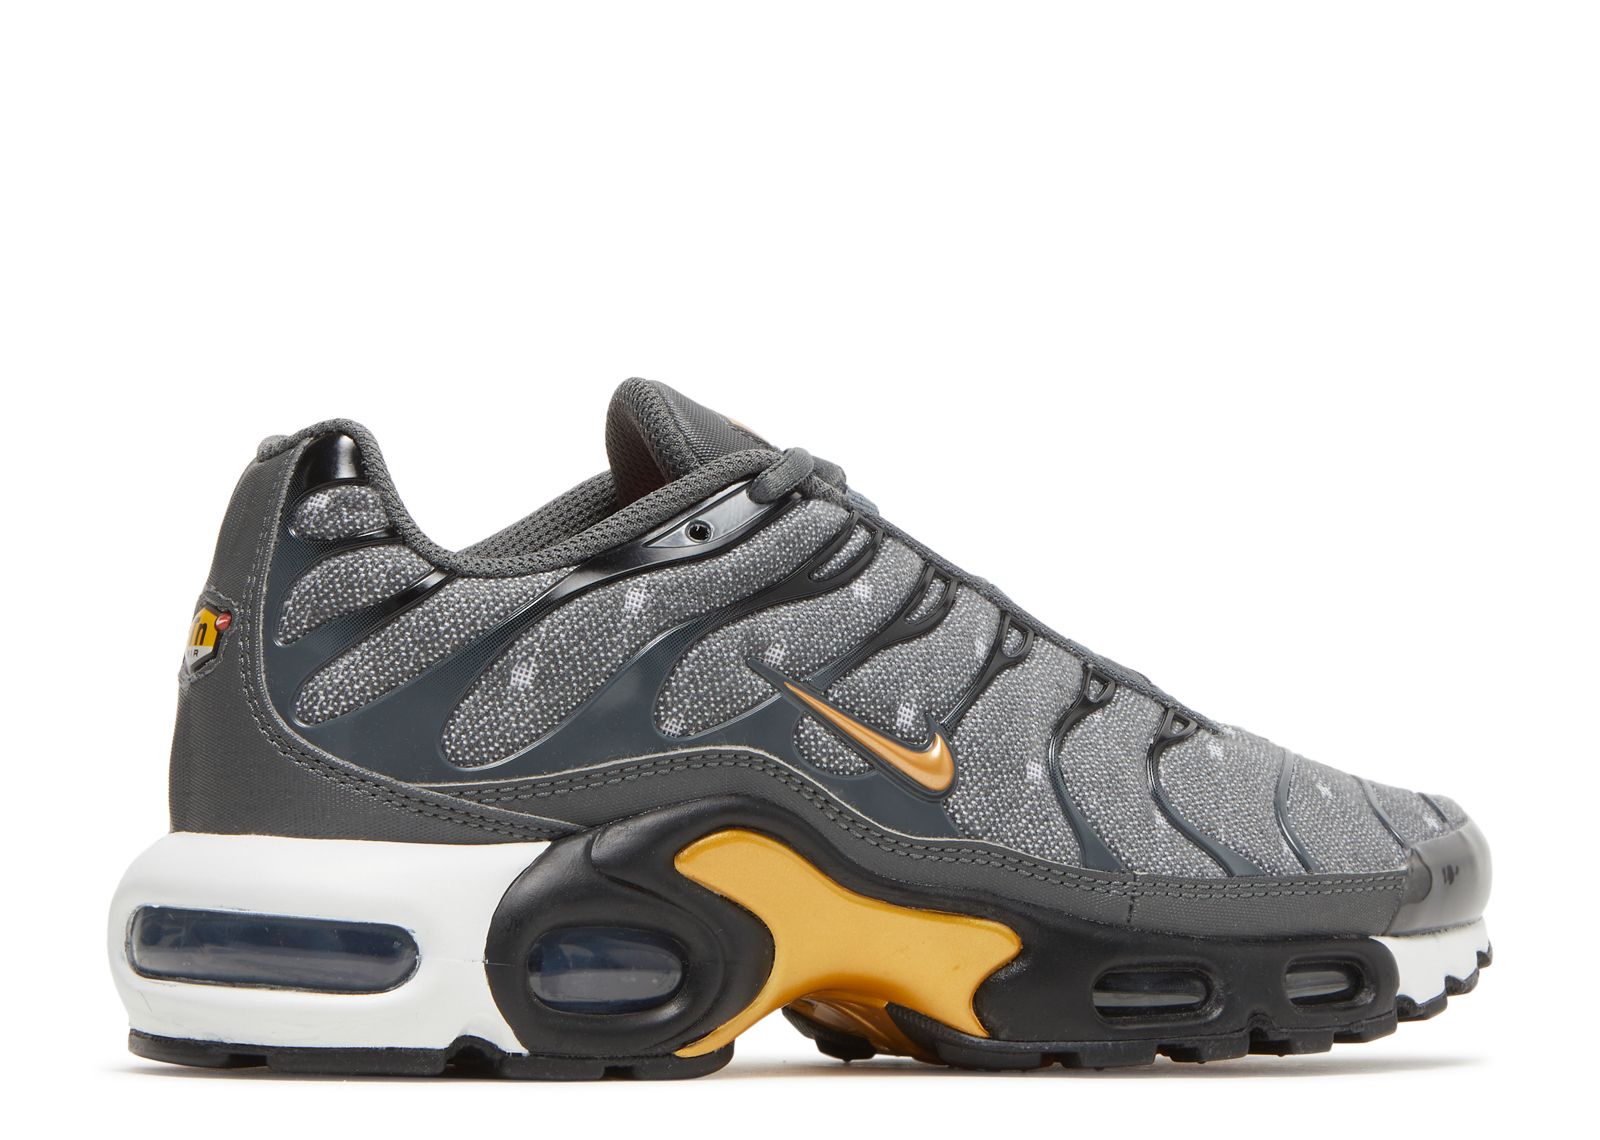 Nike Air Max Plus Grey Navy Yellow sneakers: Where to get, price, and  more details explored